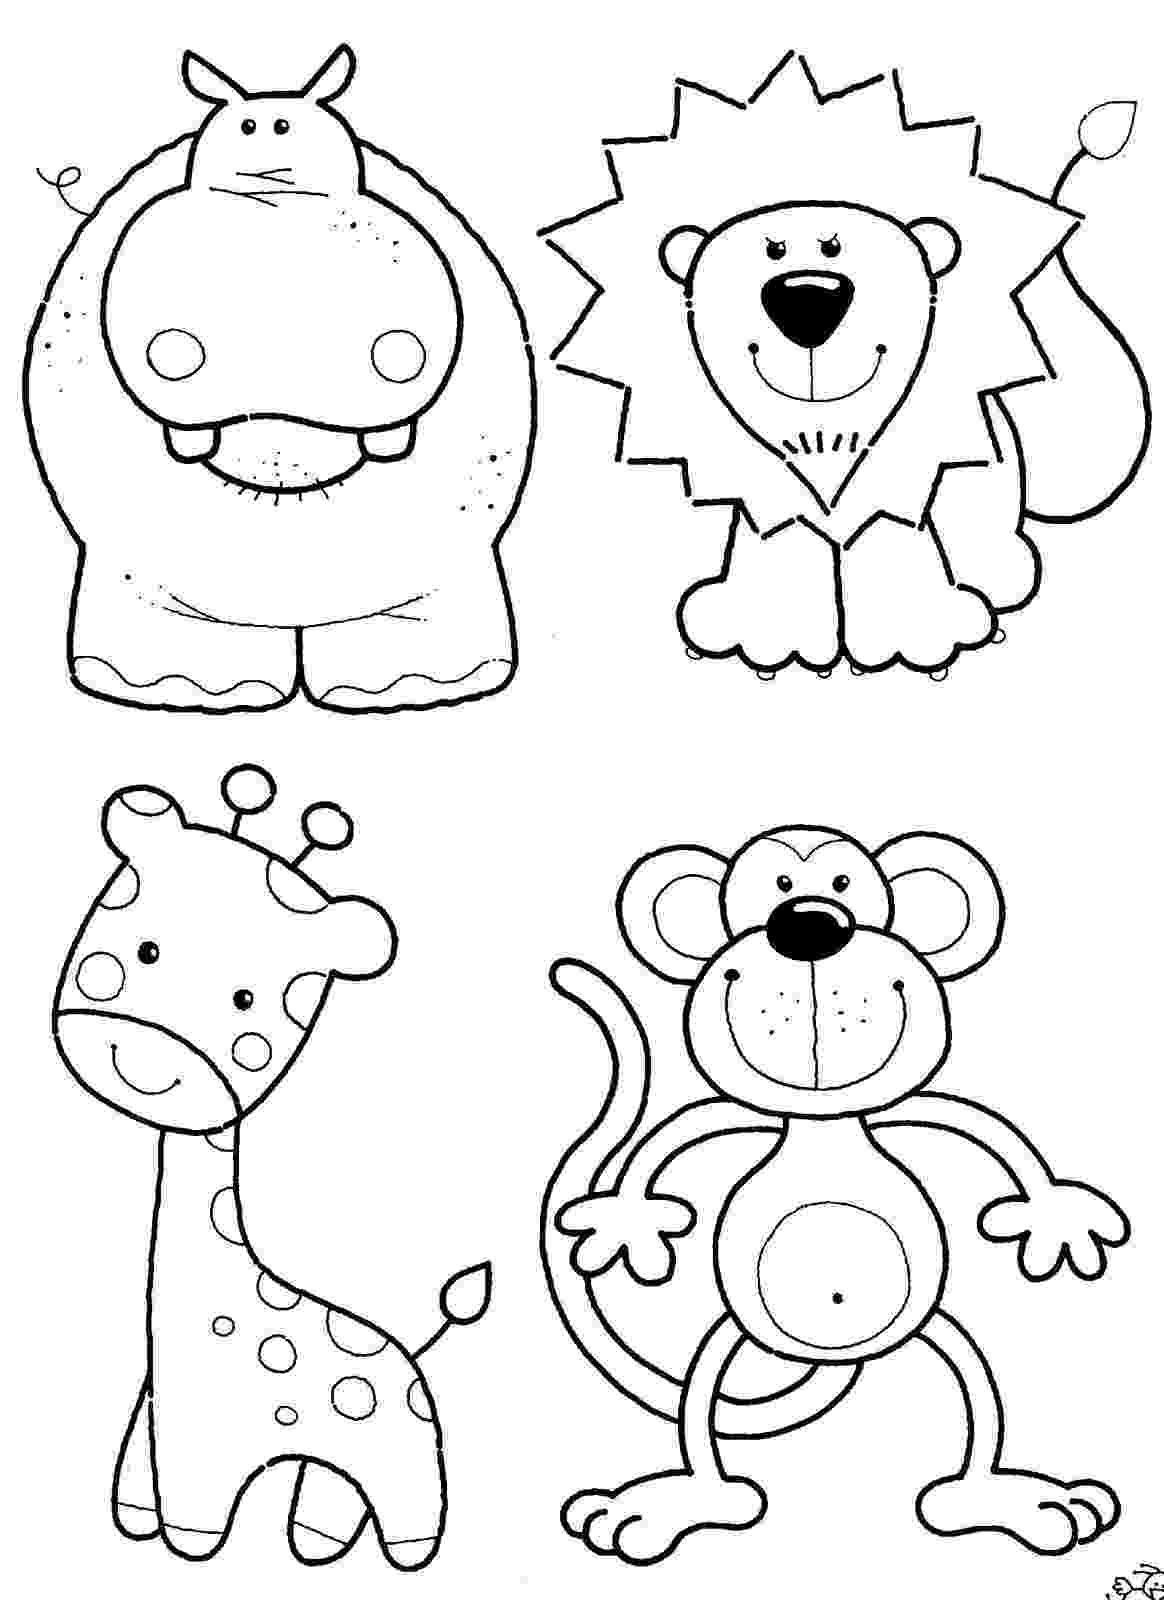 free printable coloring pages of zoo animals free printable zoo coloring pages for kids animals free coloring printable pages zoo of 